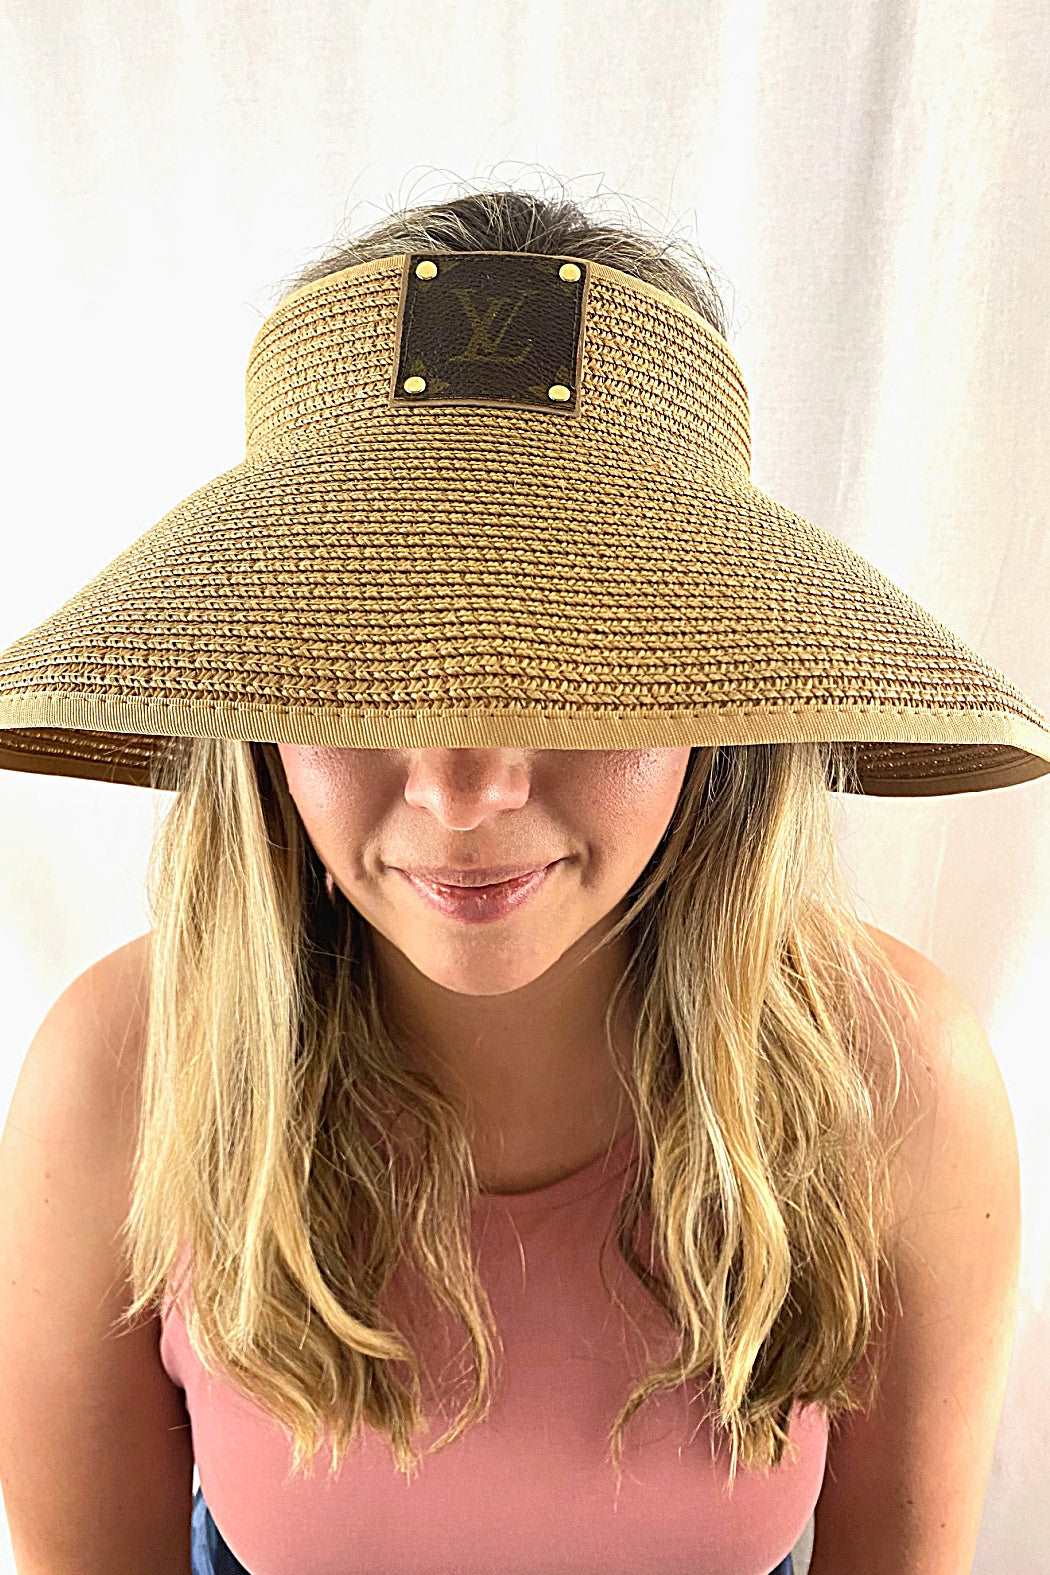 Up-cycled LV Rollable Packable Straw Visor by Embellish Your Life